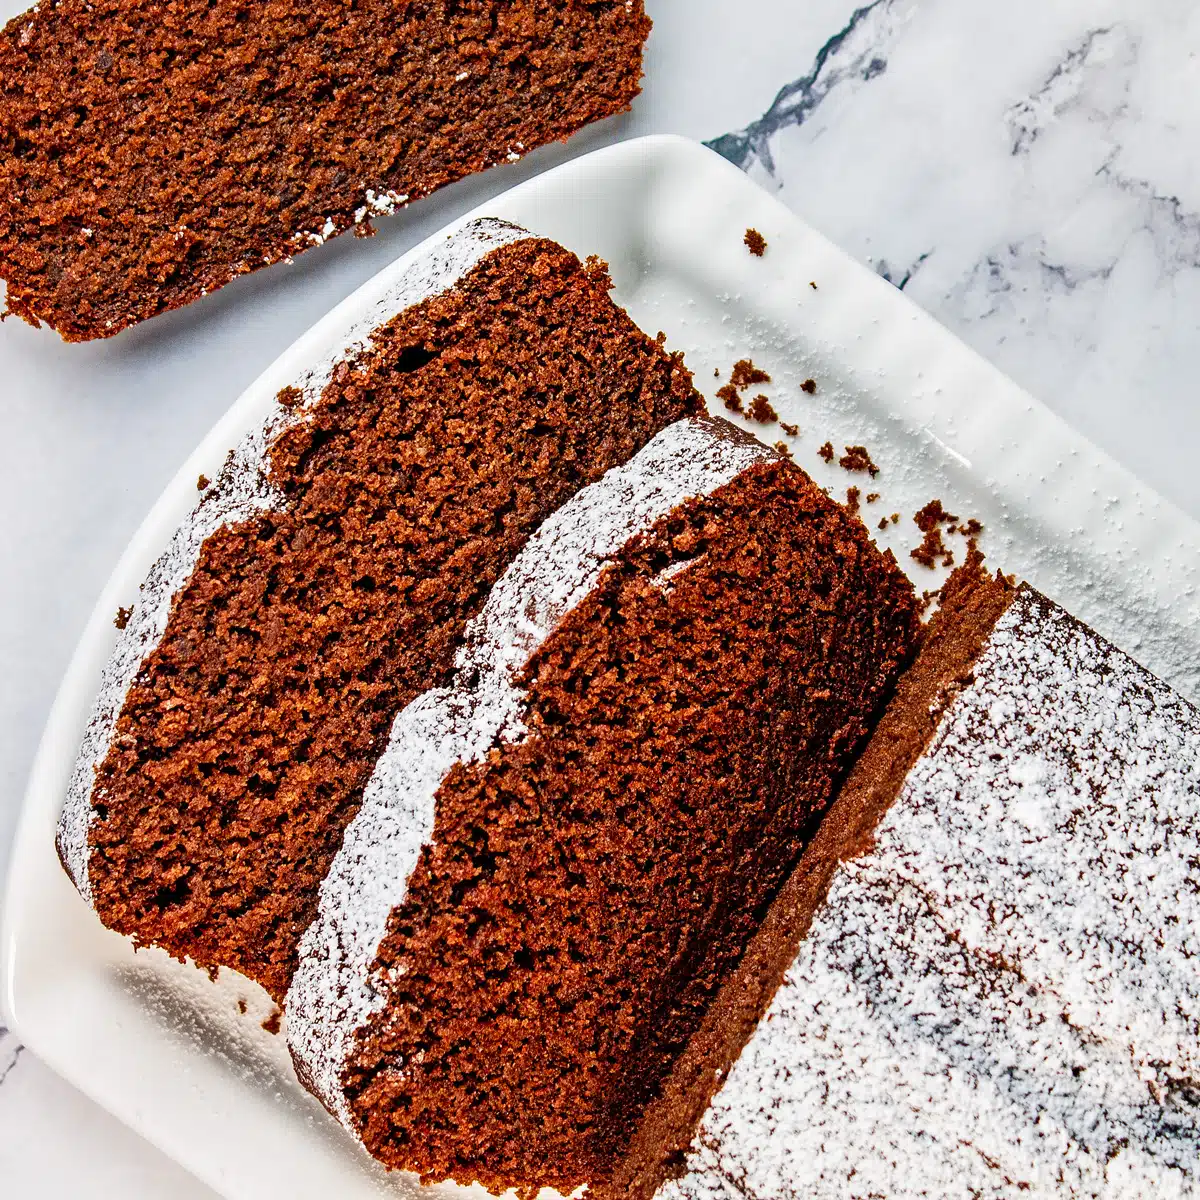 Square image of chocolate loaf cake.